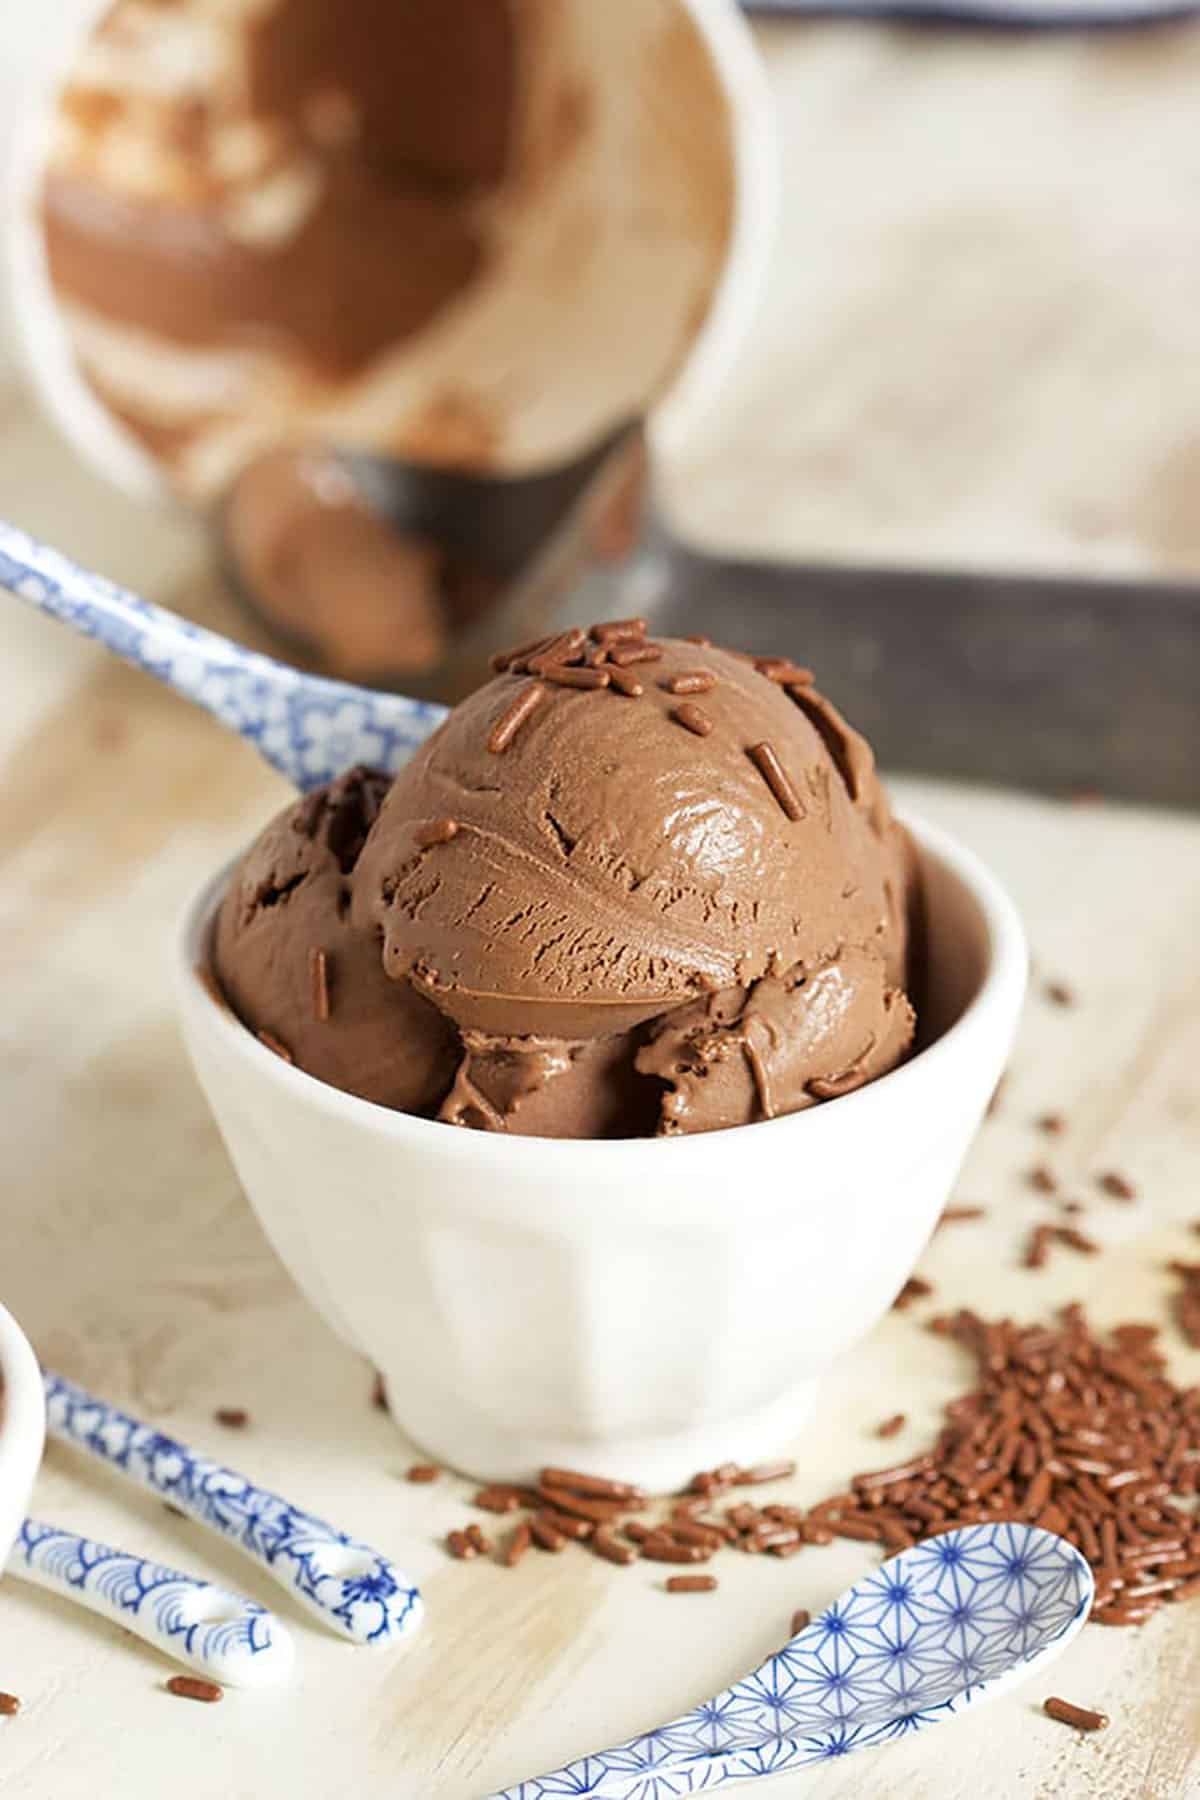 Chocolate Ice Cream in a white bowl with a white carton of chocolate ice cream in the background.